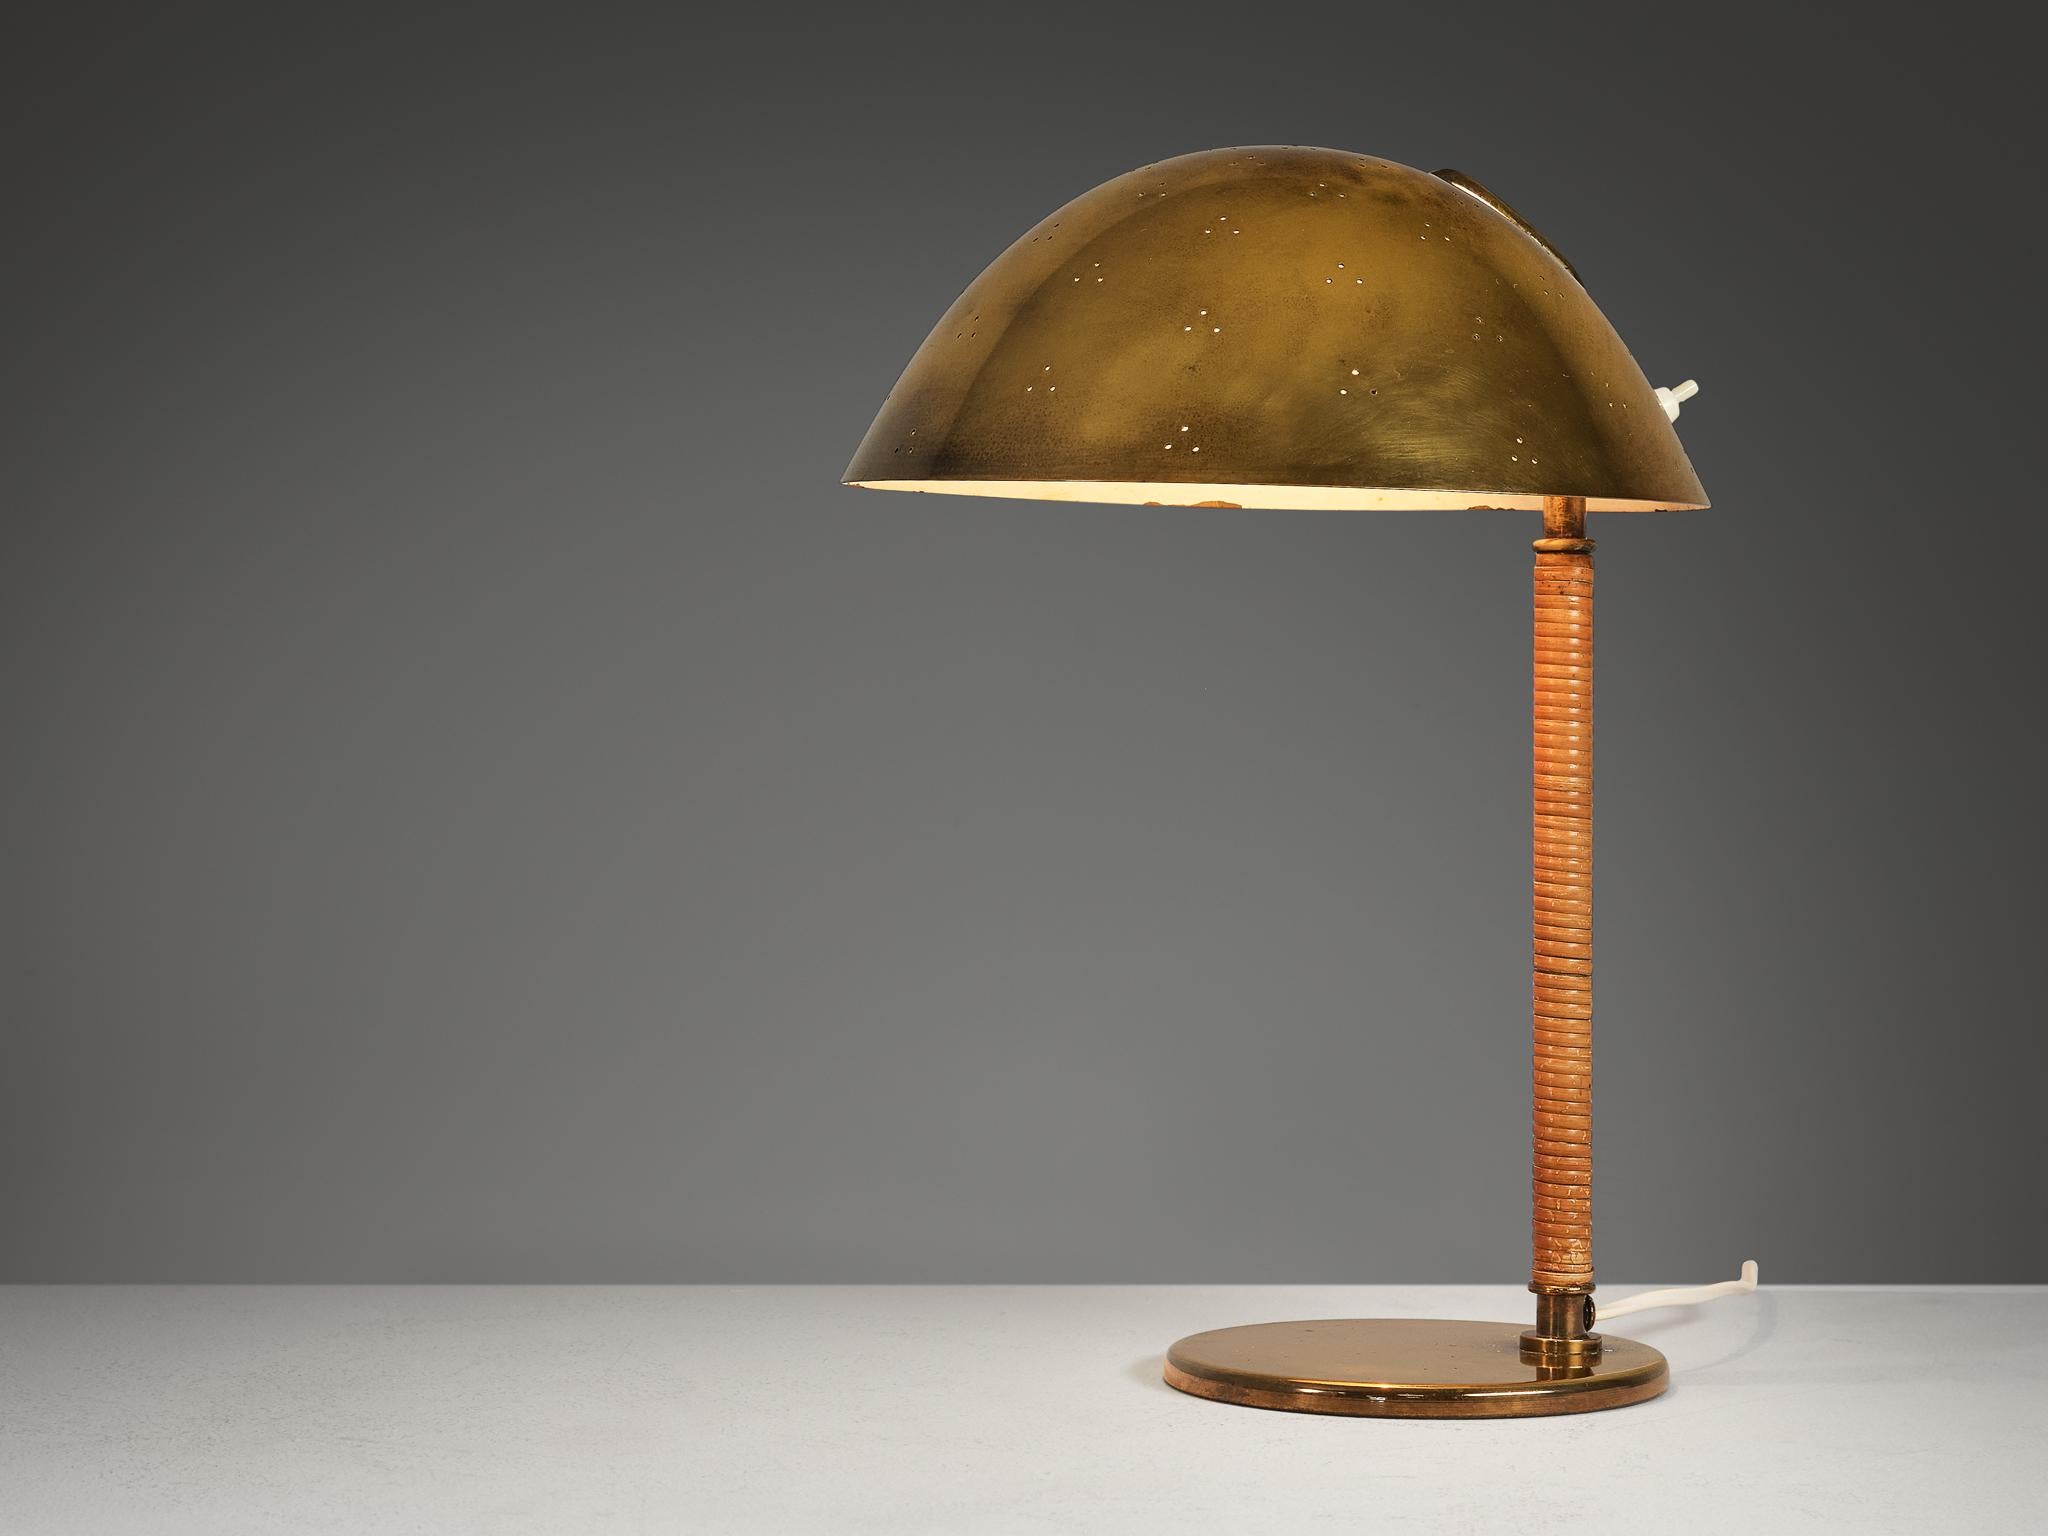 Paavo Tynell for Taito Oy, table lamp, model ‘9209’, brass, cane, Finland, circa 1950 

A truly magnificent piece that scores highly on every design aspect: execution, material use, craftsmanship, and detail. Paavo Tynell, the master in the fields